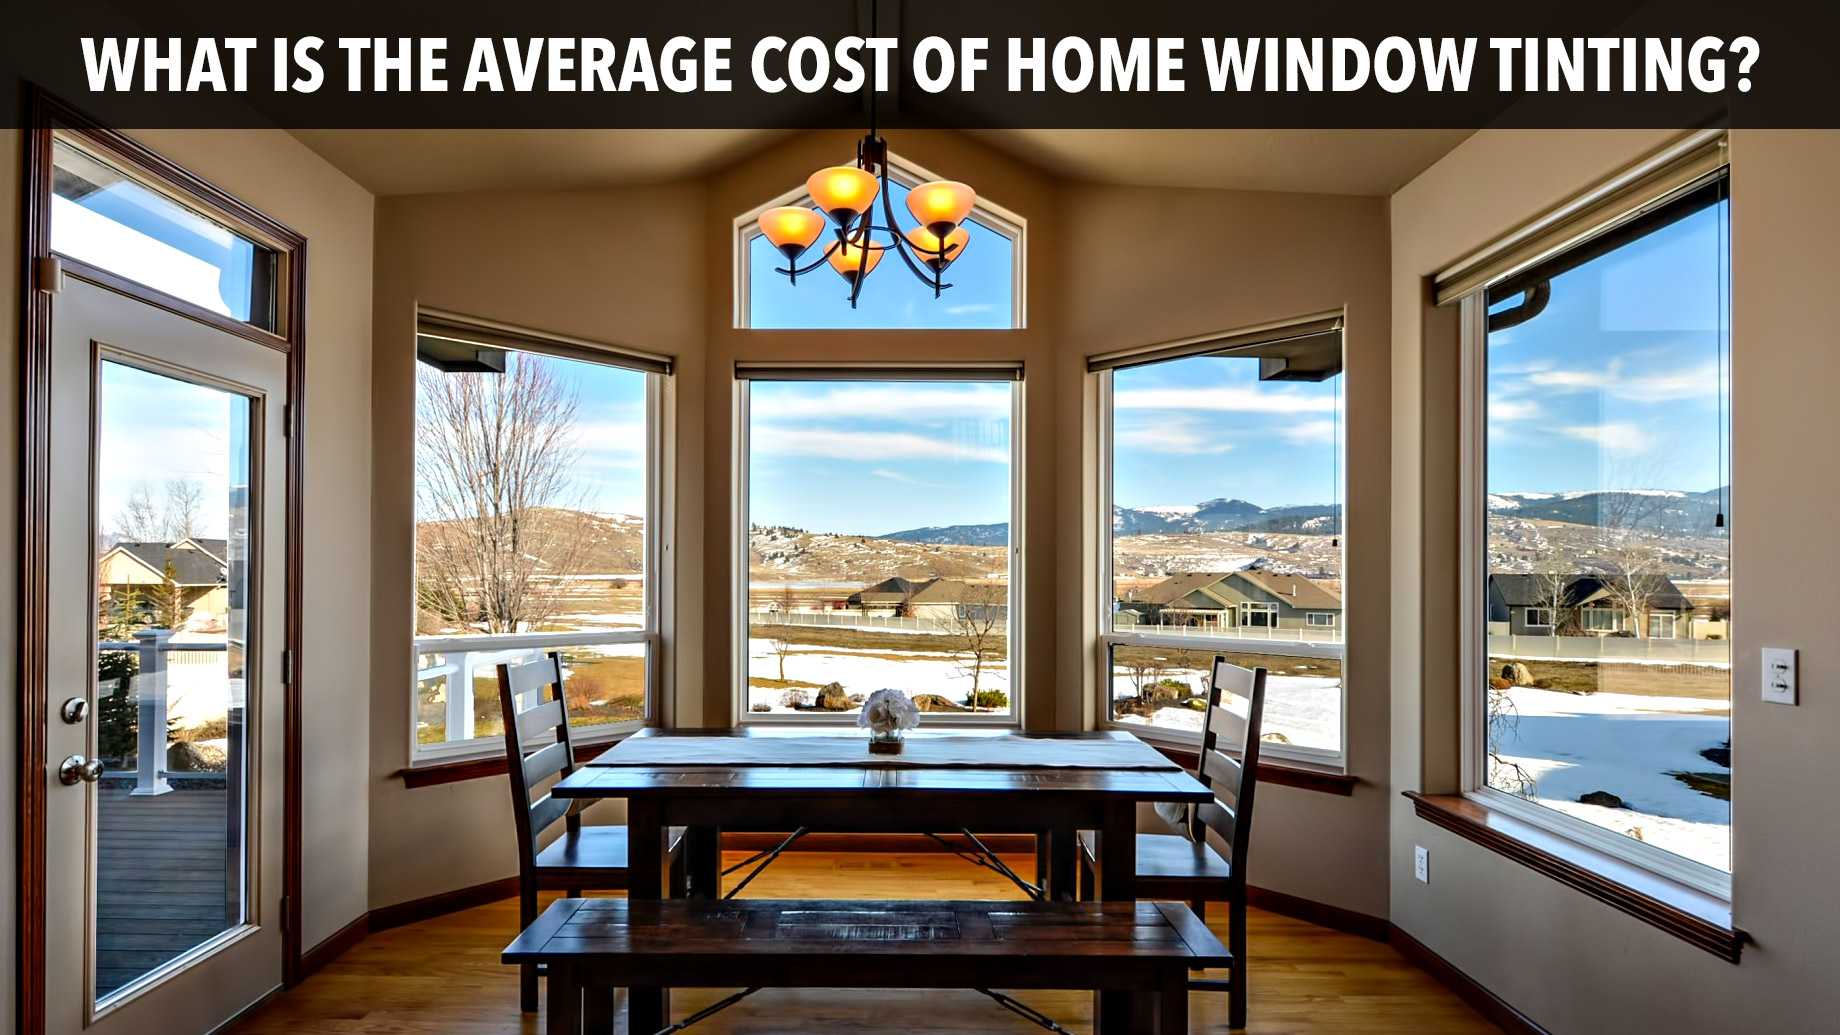 What Is the Average Cost of Home Window Tinting?